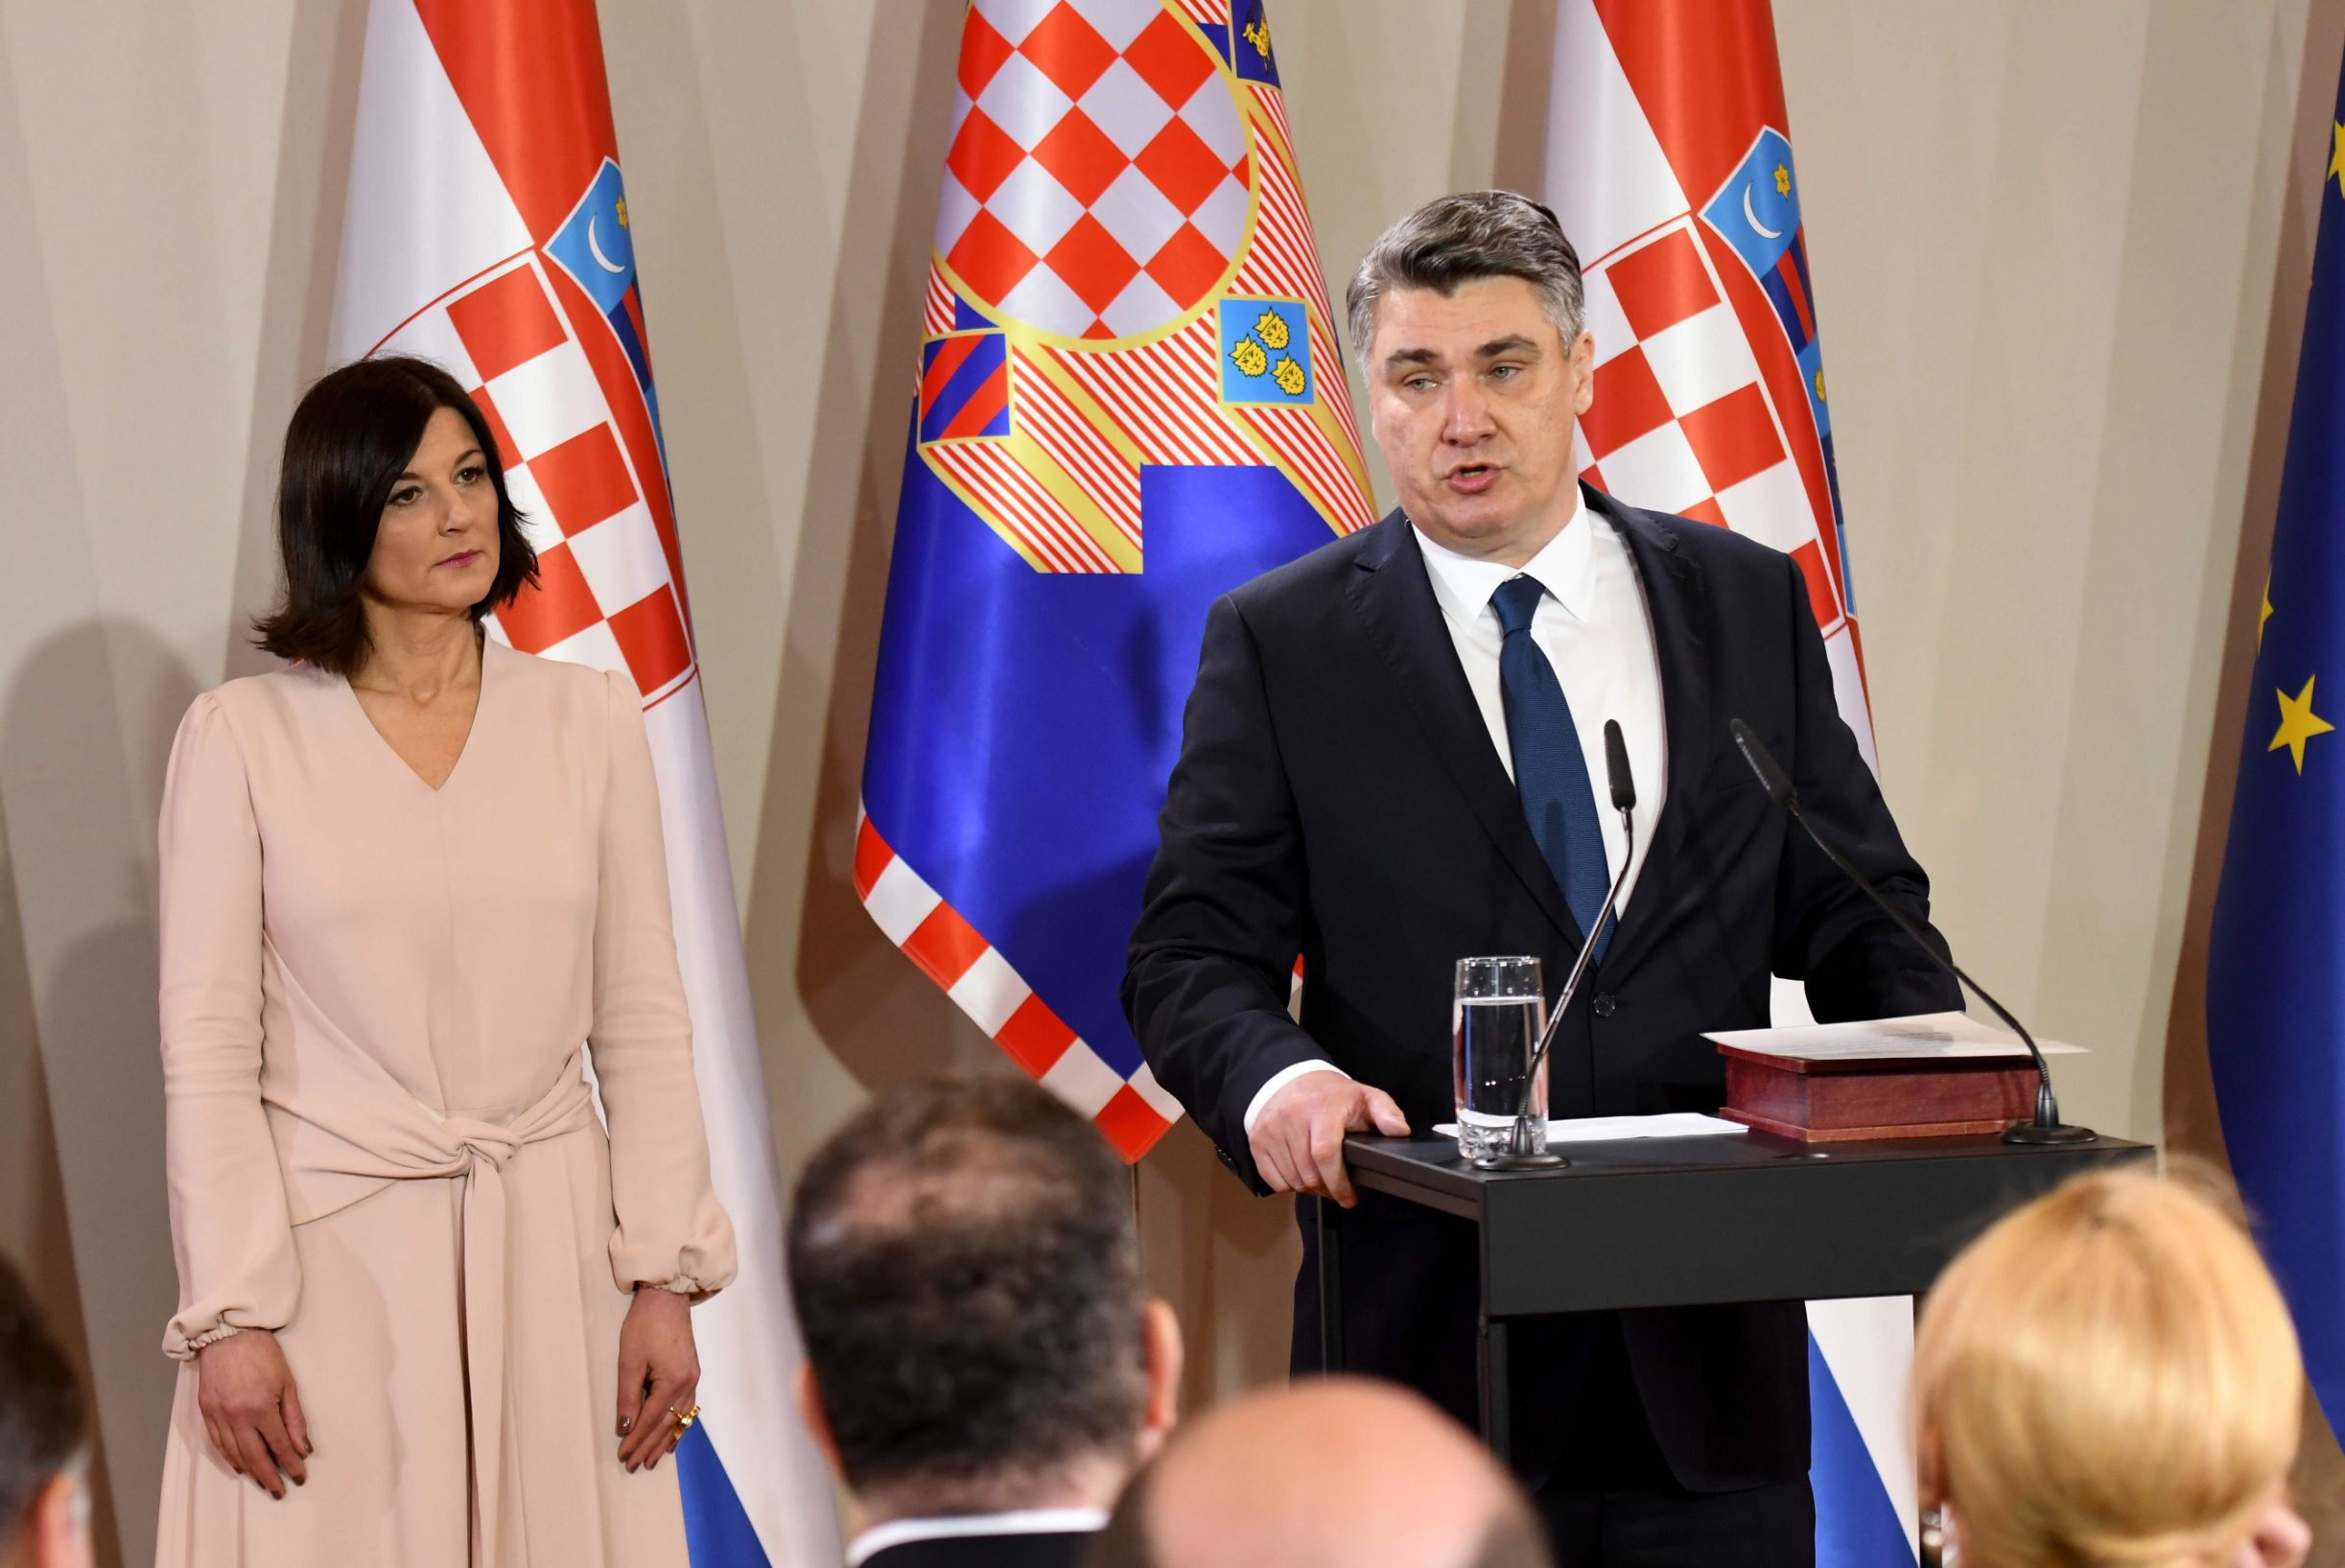 New Croatian President Zoran Milanovic delivers a speech flanked by his wife Sanja Music Milanovic